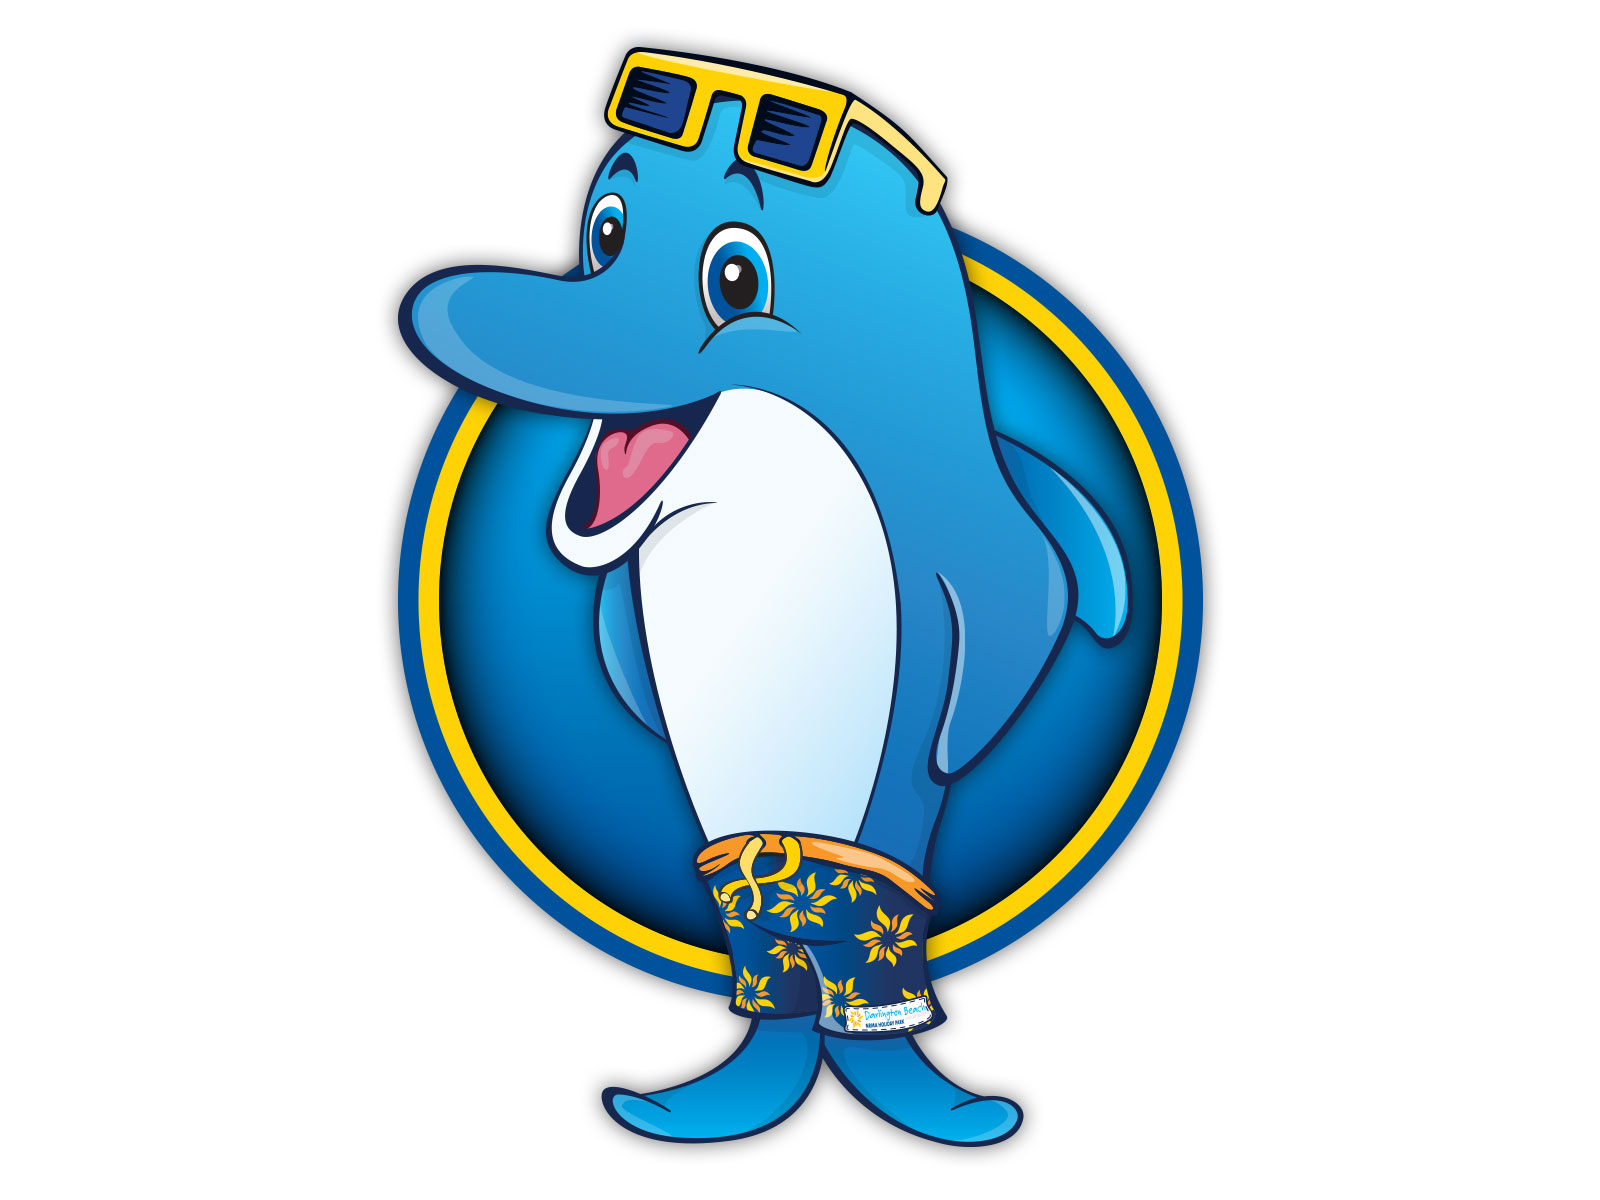 Colourful cartoon style dolphin character illustration for mascot